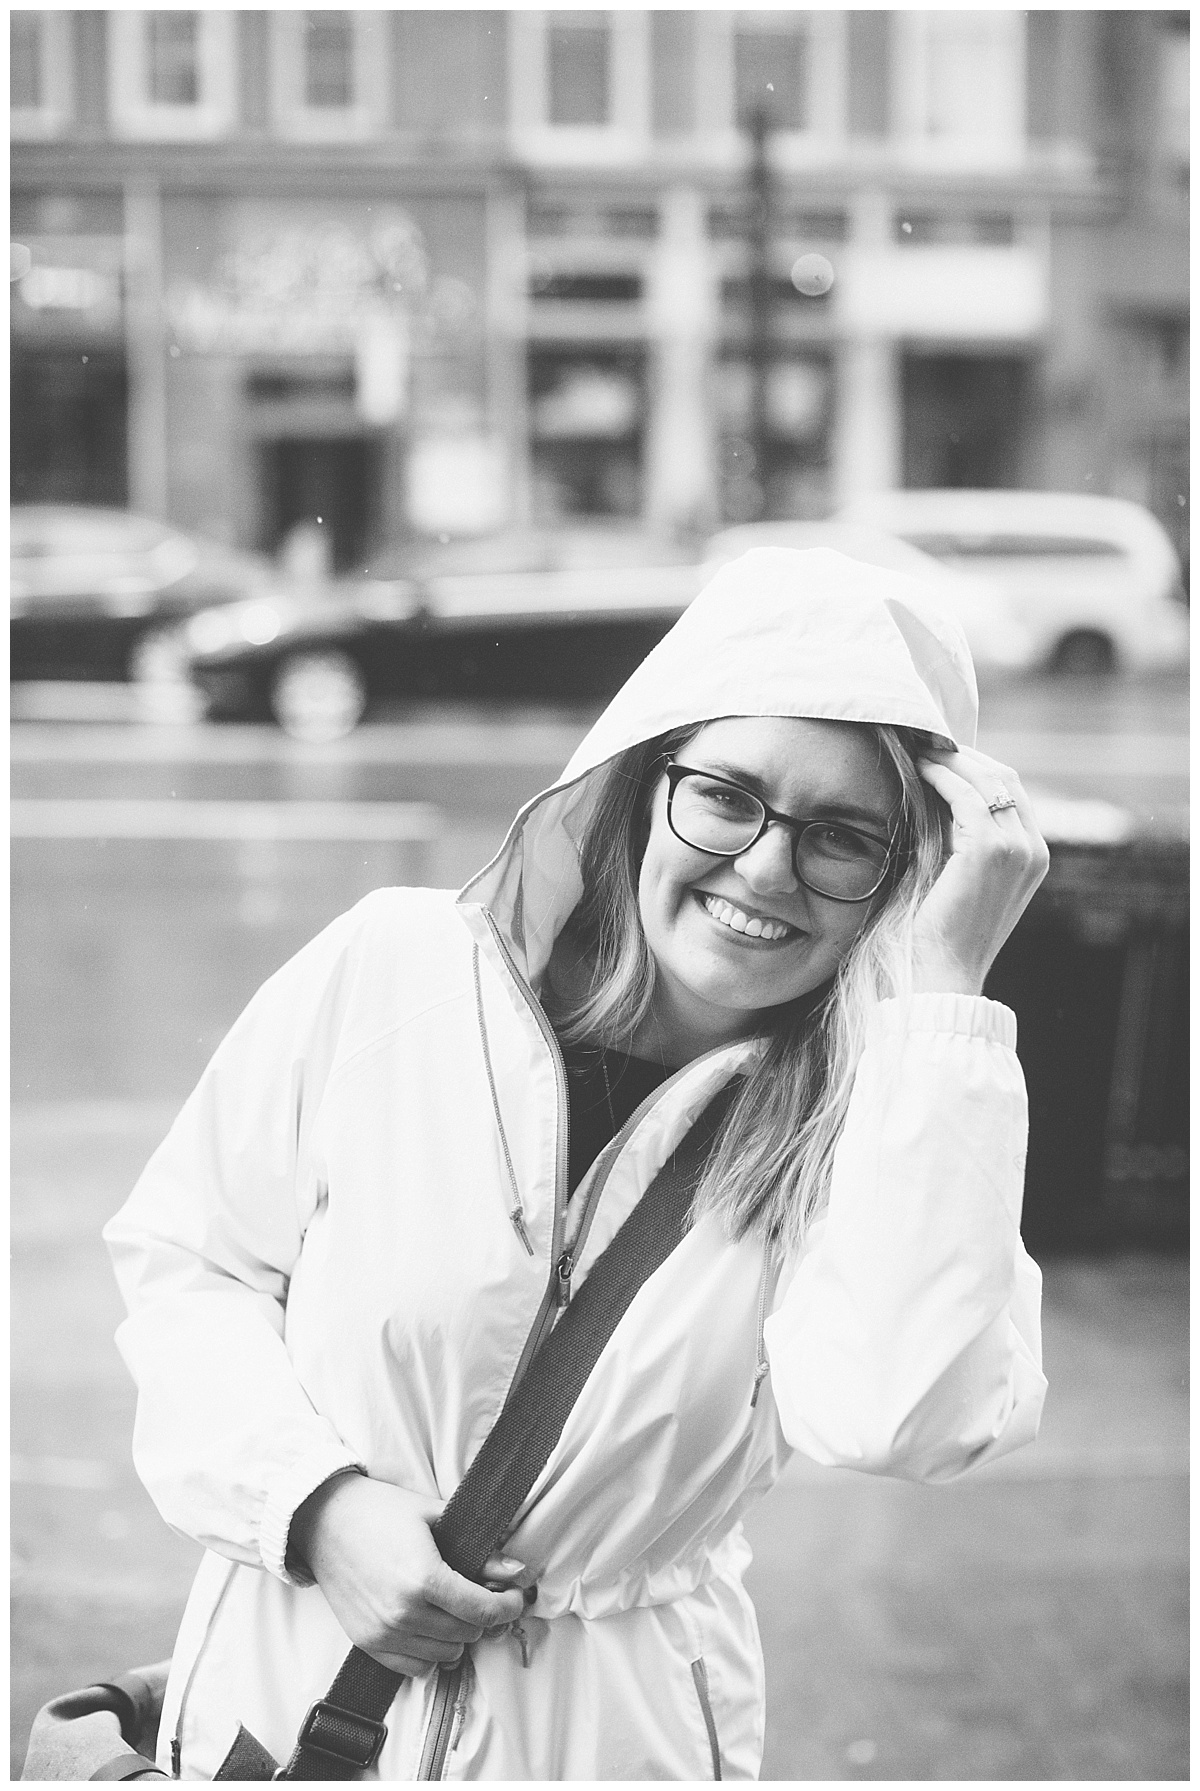 Nashville, Alysa Rene Photography, Rainy, Weekend, Winter, Downtown, Tennesee, Tourism, Itinerary, Bobby Hotel, Rooftop Igloo, Bus, Rooftop Bar